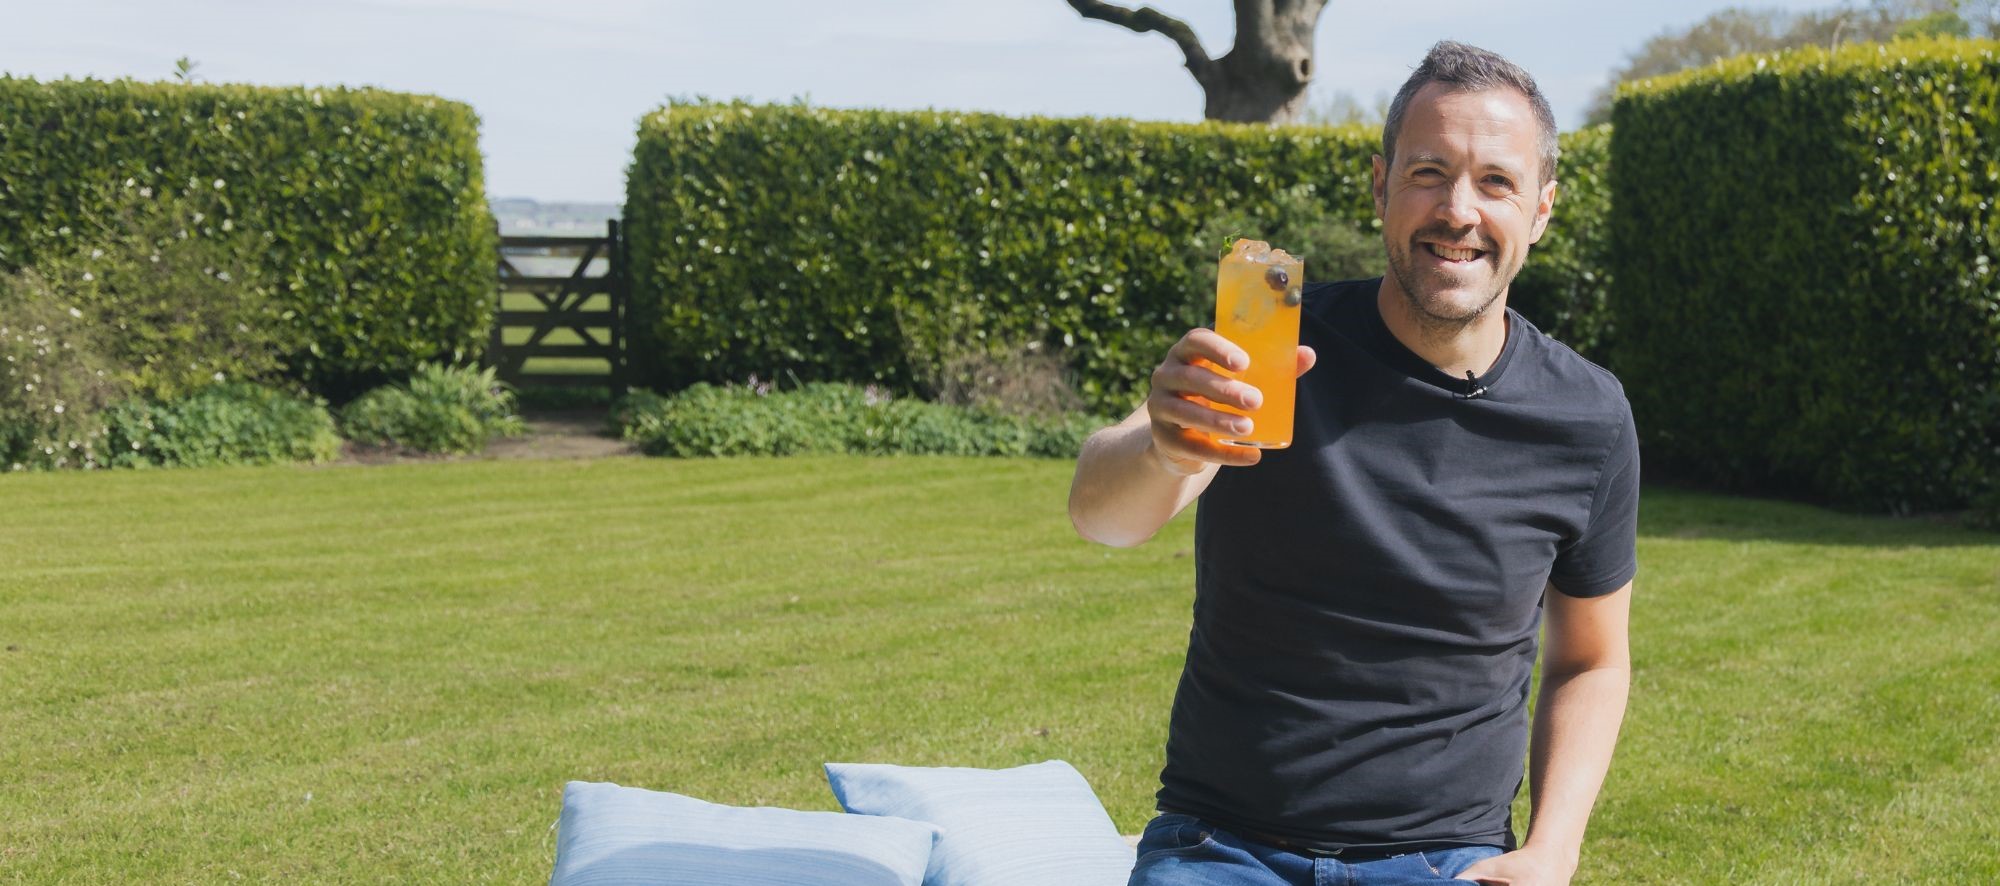 Moments Made N(ice)r Expert Mixologist Matt in the garden making an ice cold iced tea